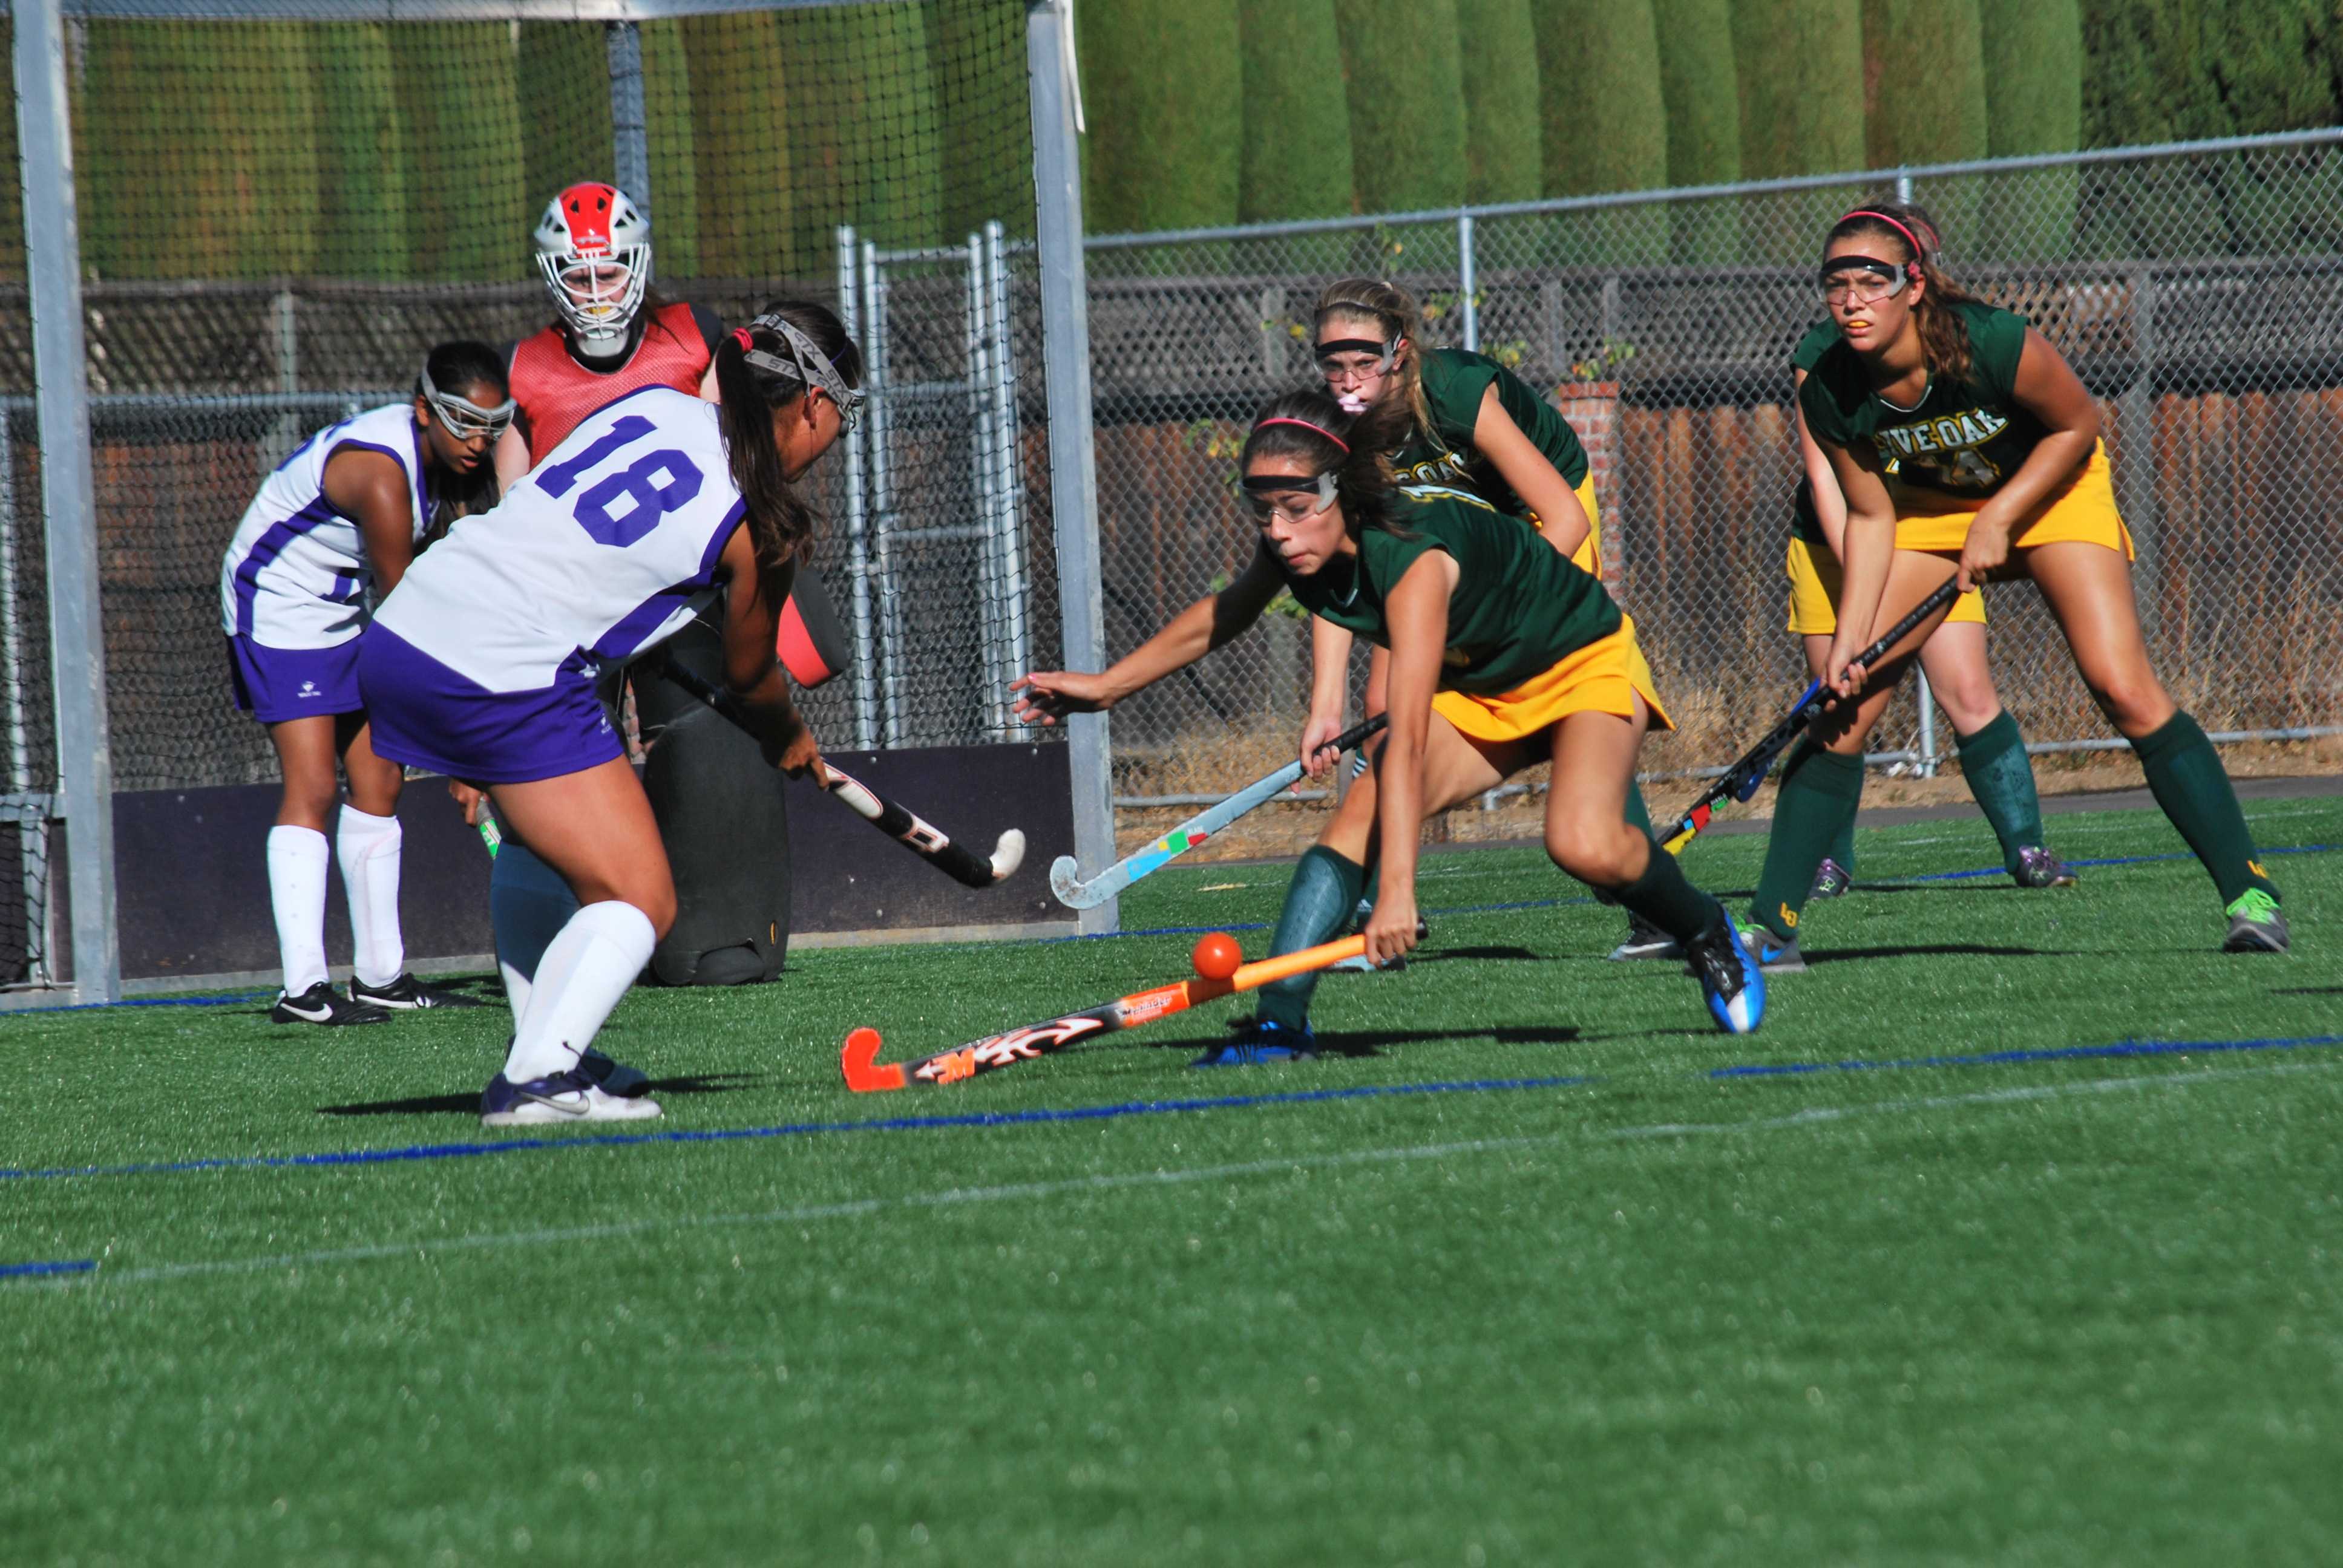 FIELD HOCKEY: Playing Under Protest - MVHS wins 3-1 against LOHS.